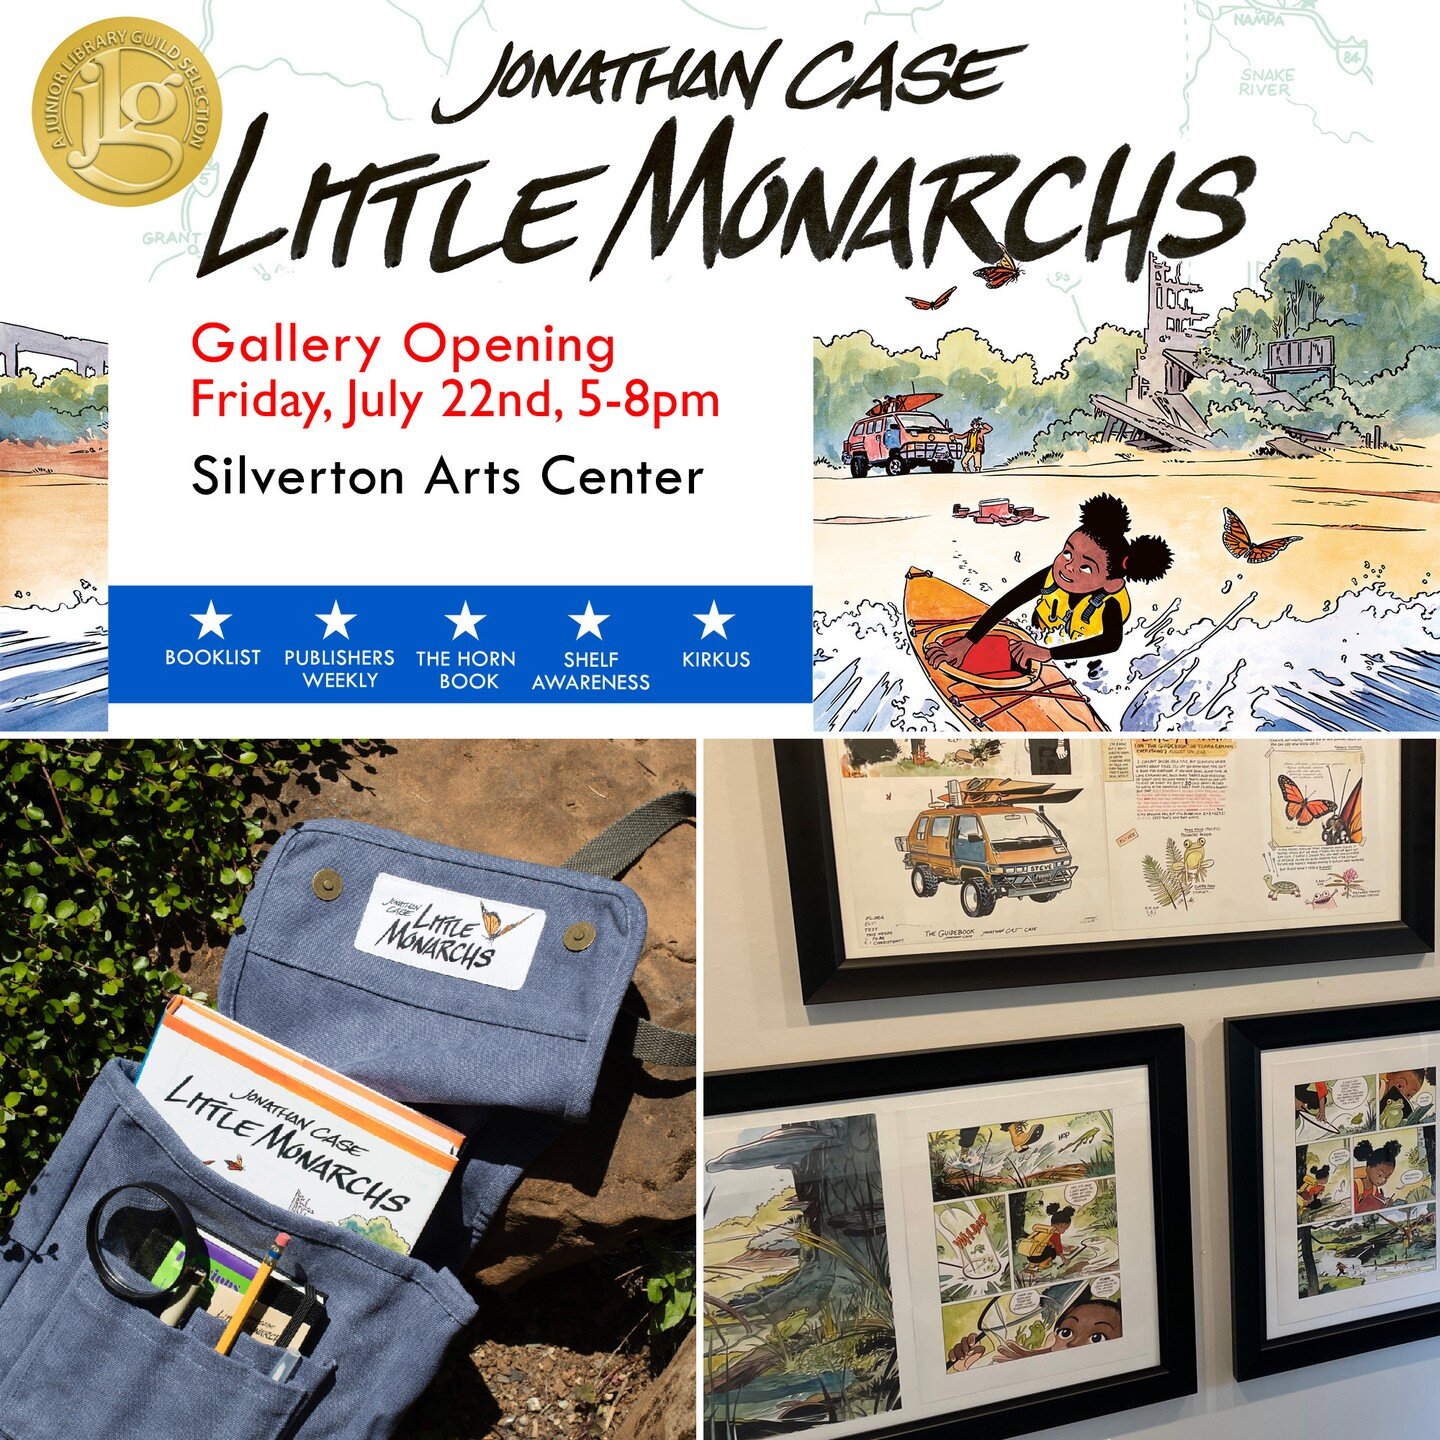 Good morning! Tonight's my gallery opening for Little Monarchs at the Silverton Arts Center, and I'm happy to announce that unlike last time -- it's actually happening! Covid delayed the show's original start date, but it's up and ready to go: I have